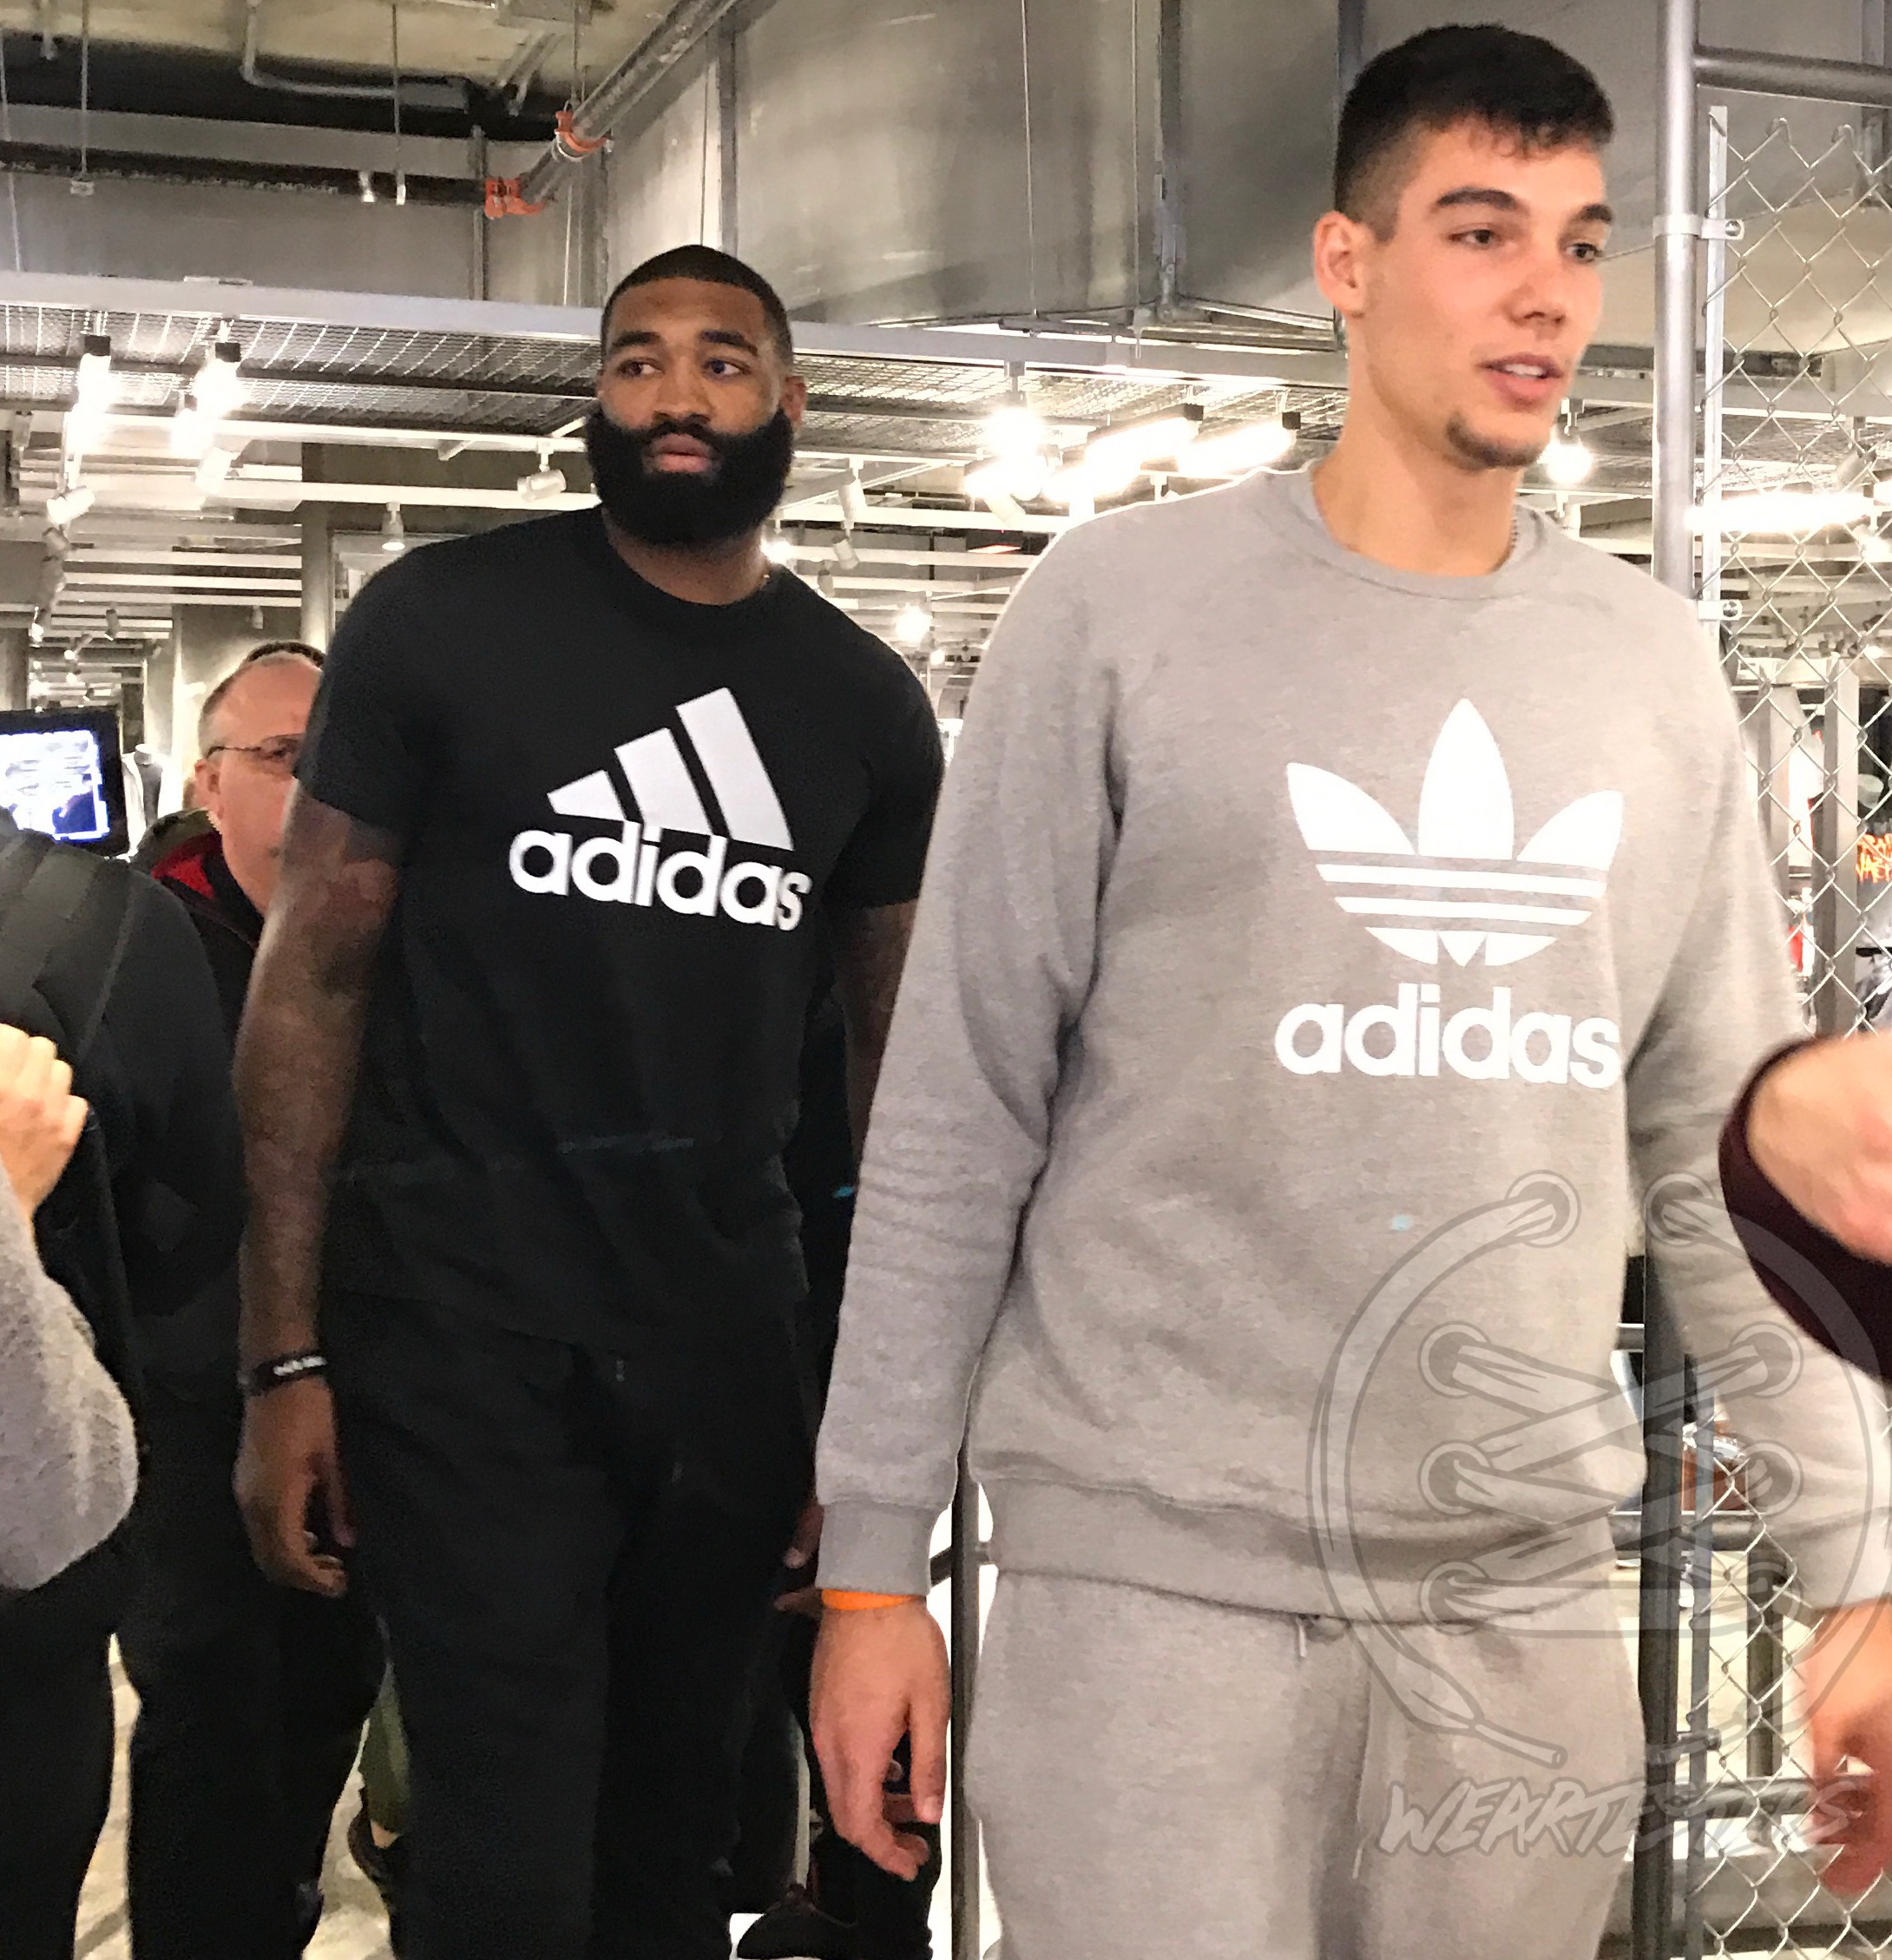 Adidas NYC - Willy and Kyle)